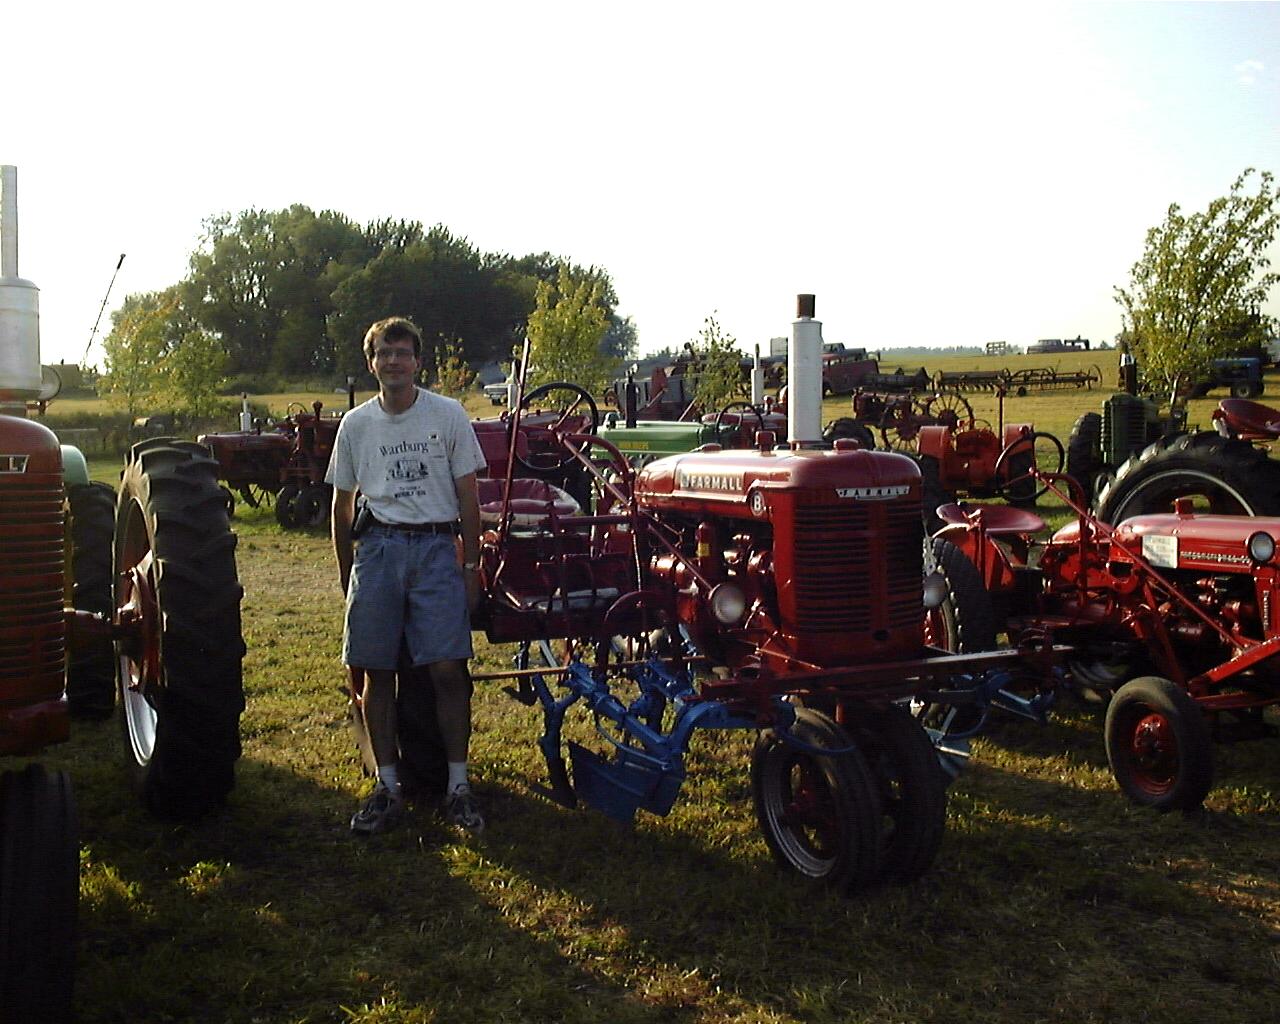 Tim & Farmall?
Cathy didn't think she could talk Tim into posing with this International FarmAll, but he did it anyway (with the disclaimer that the Deere's are much cooler!)
